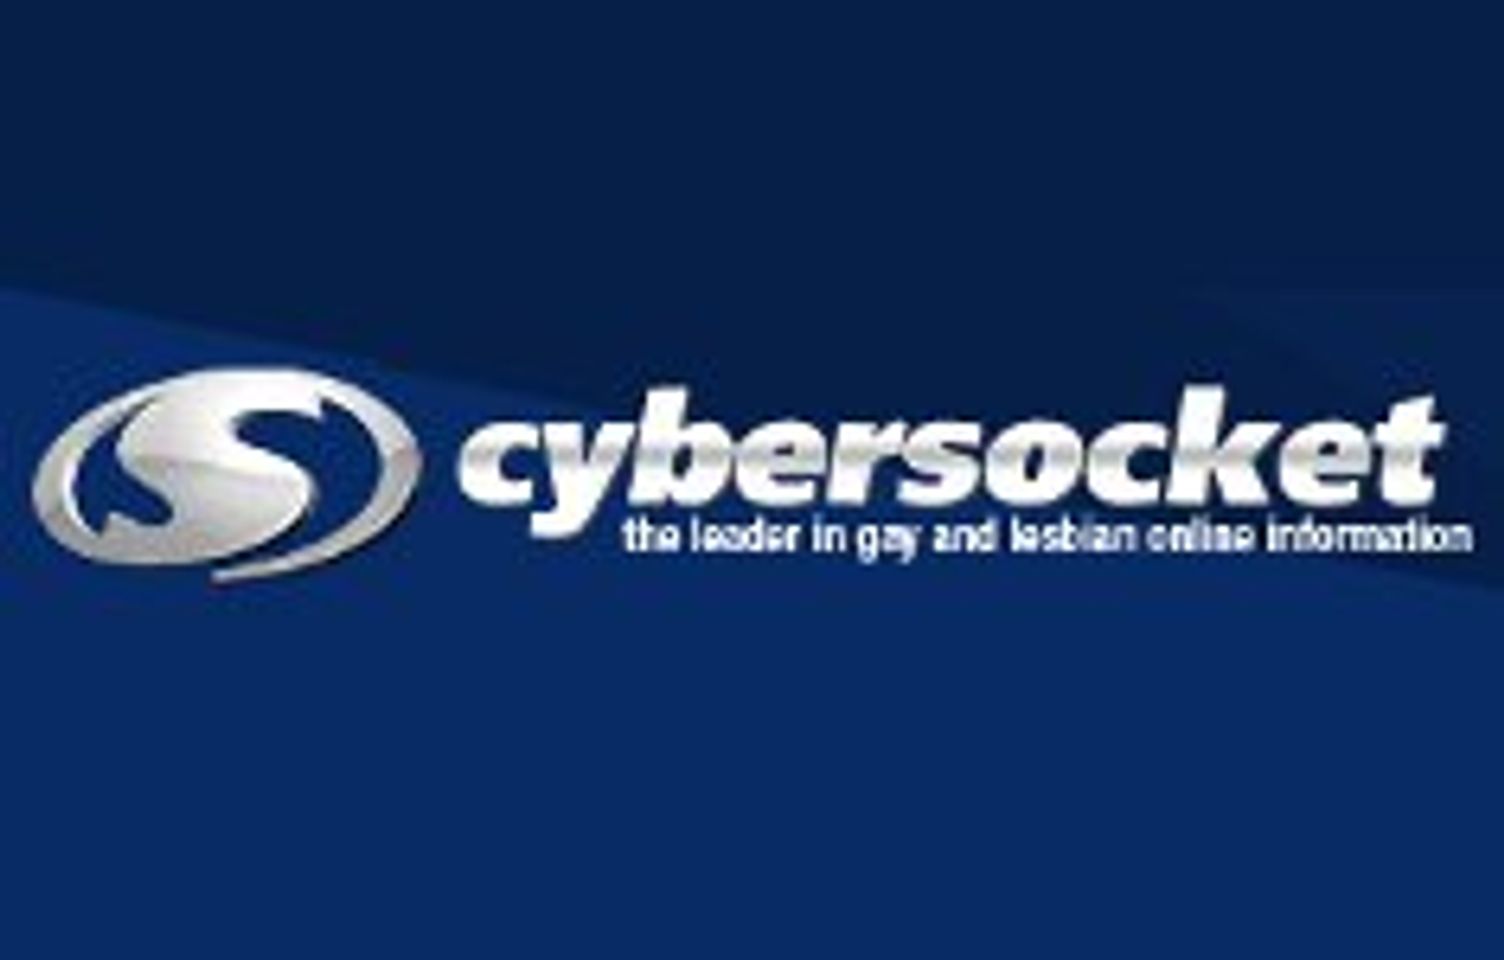 Riley Price Gives First Look at New Site to 'Cybersocket Magazine'